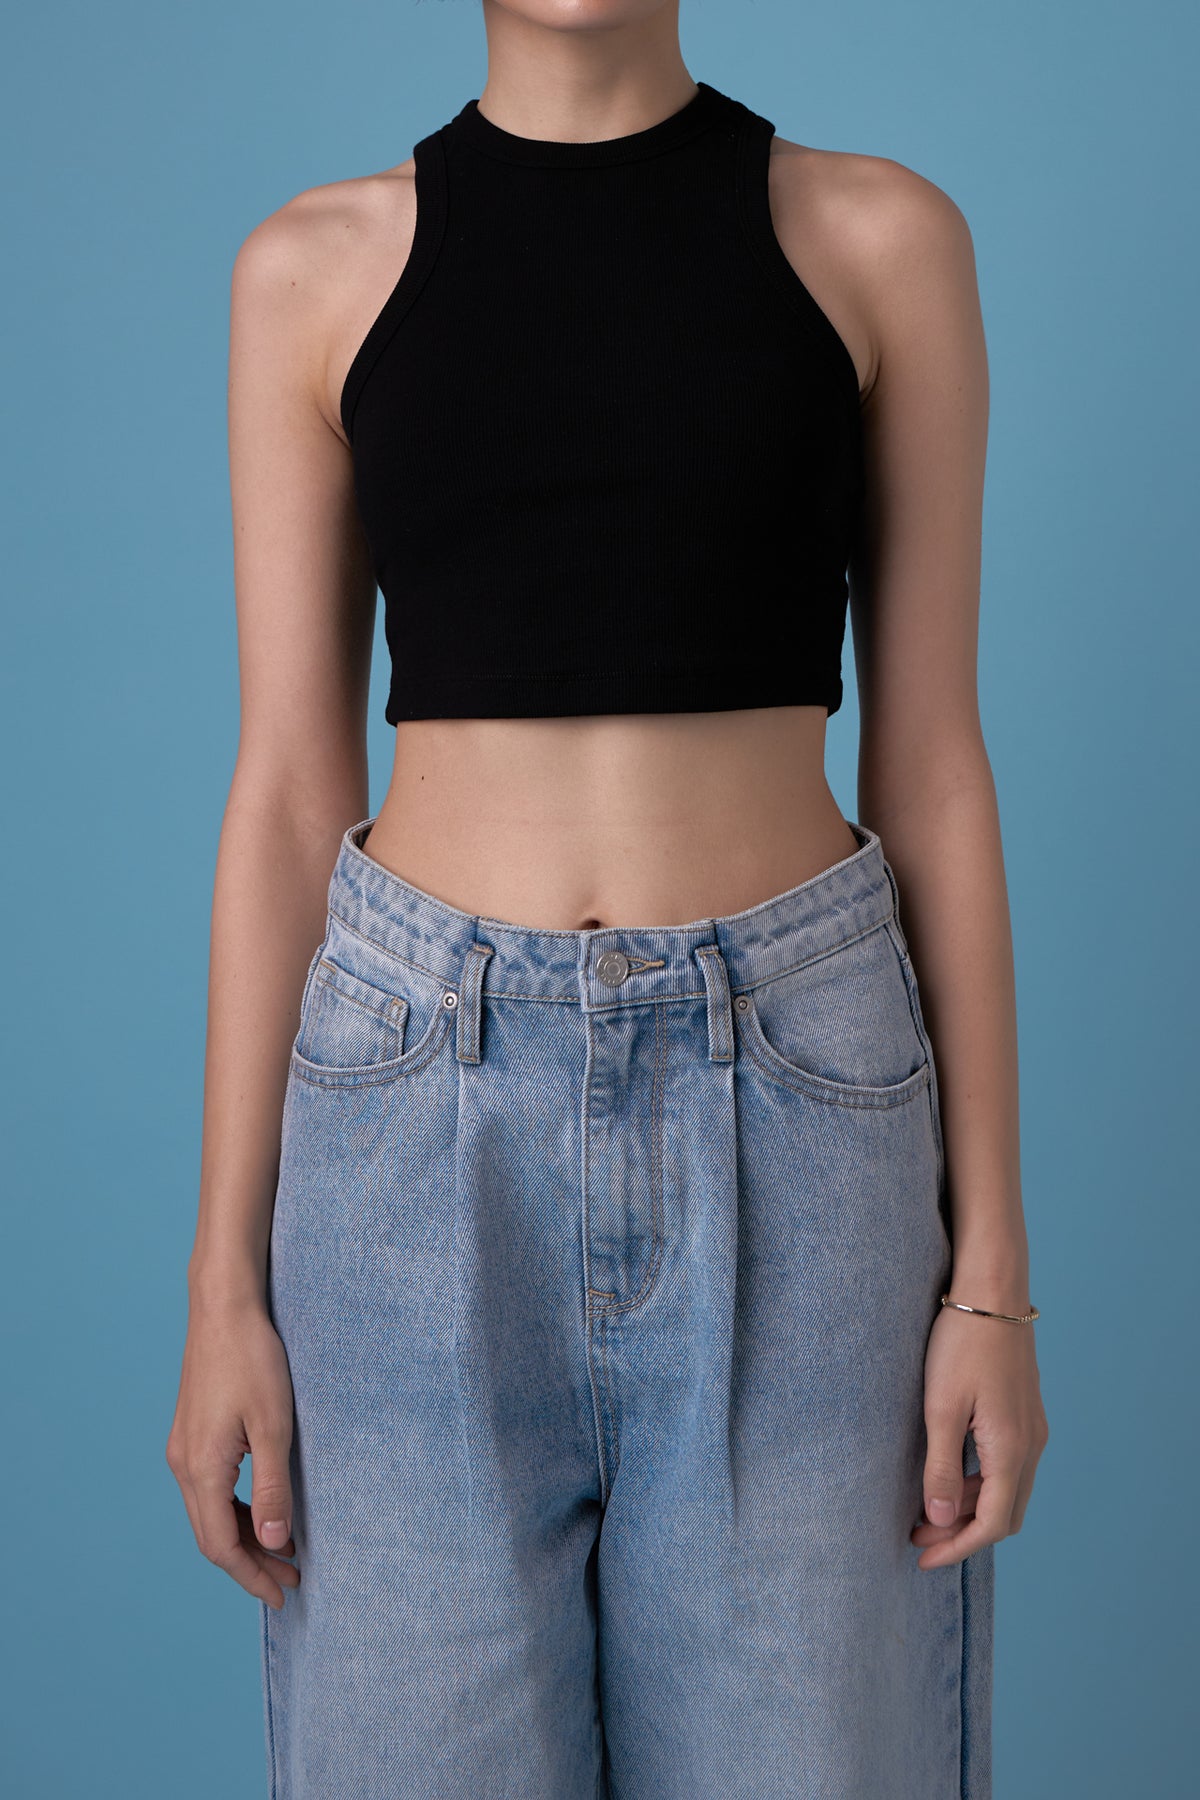 GREY LAB - Cropped Racerback Tank - CAMI TOPS & TANK available at Objectrare